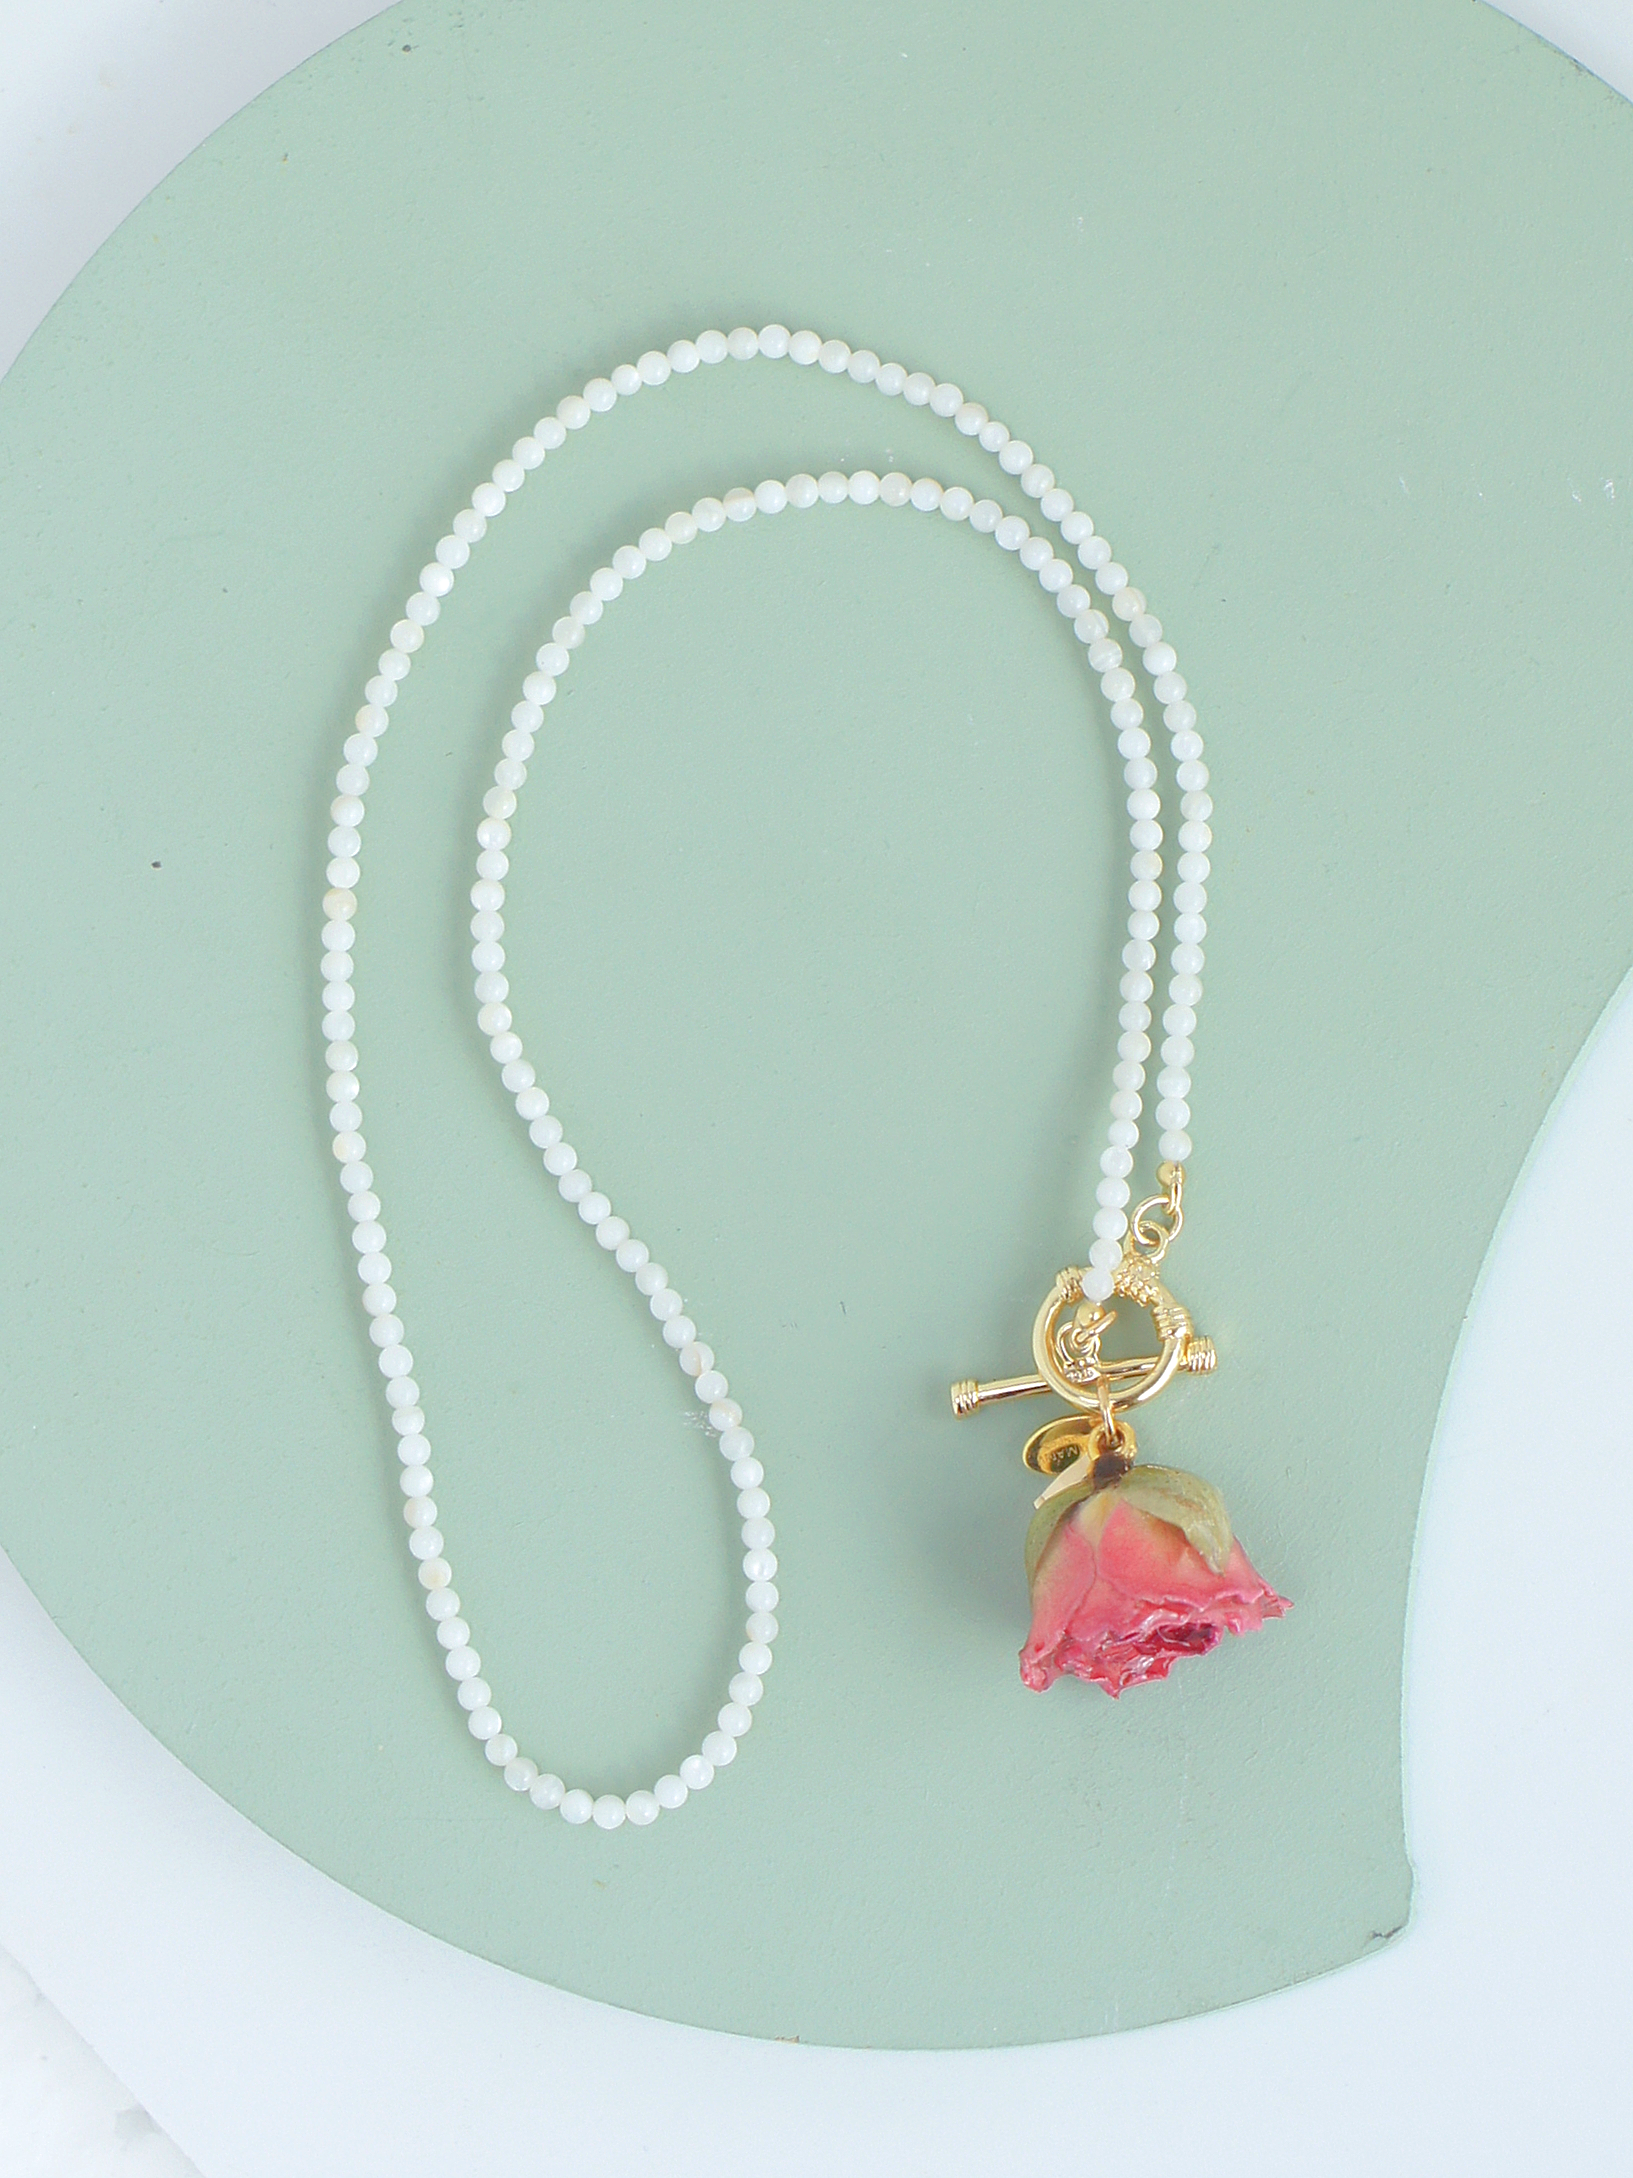 *REAL FLOWER* Bella Rosa Mother of Pearl Necklace with Pink Rosebud and Green Crystal